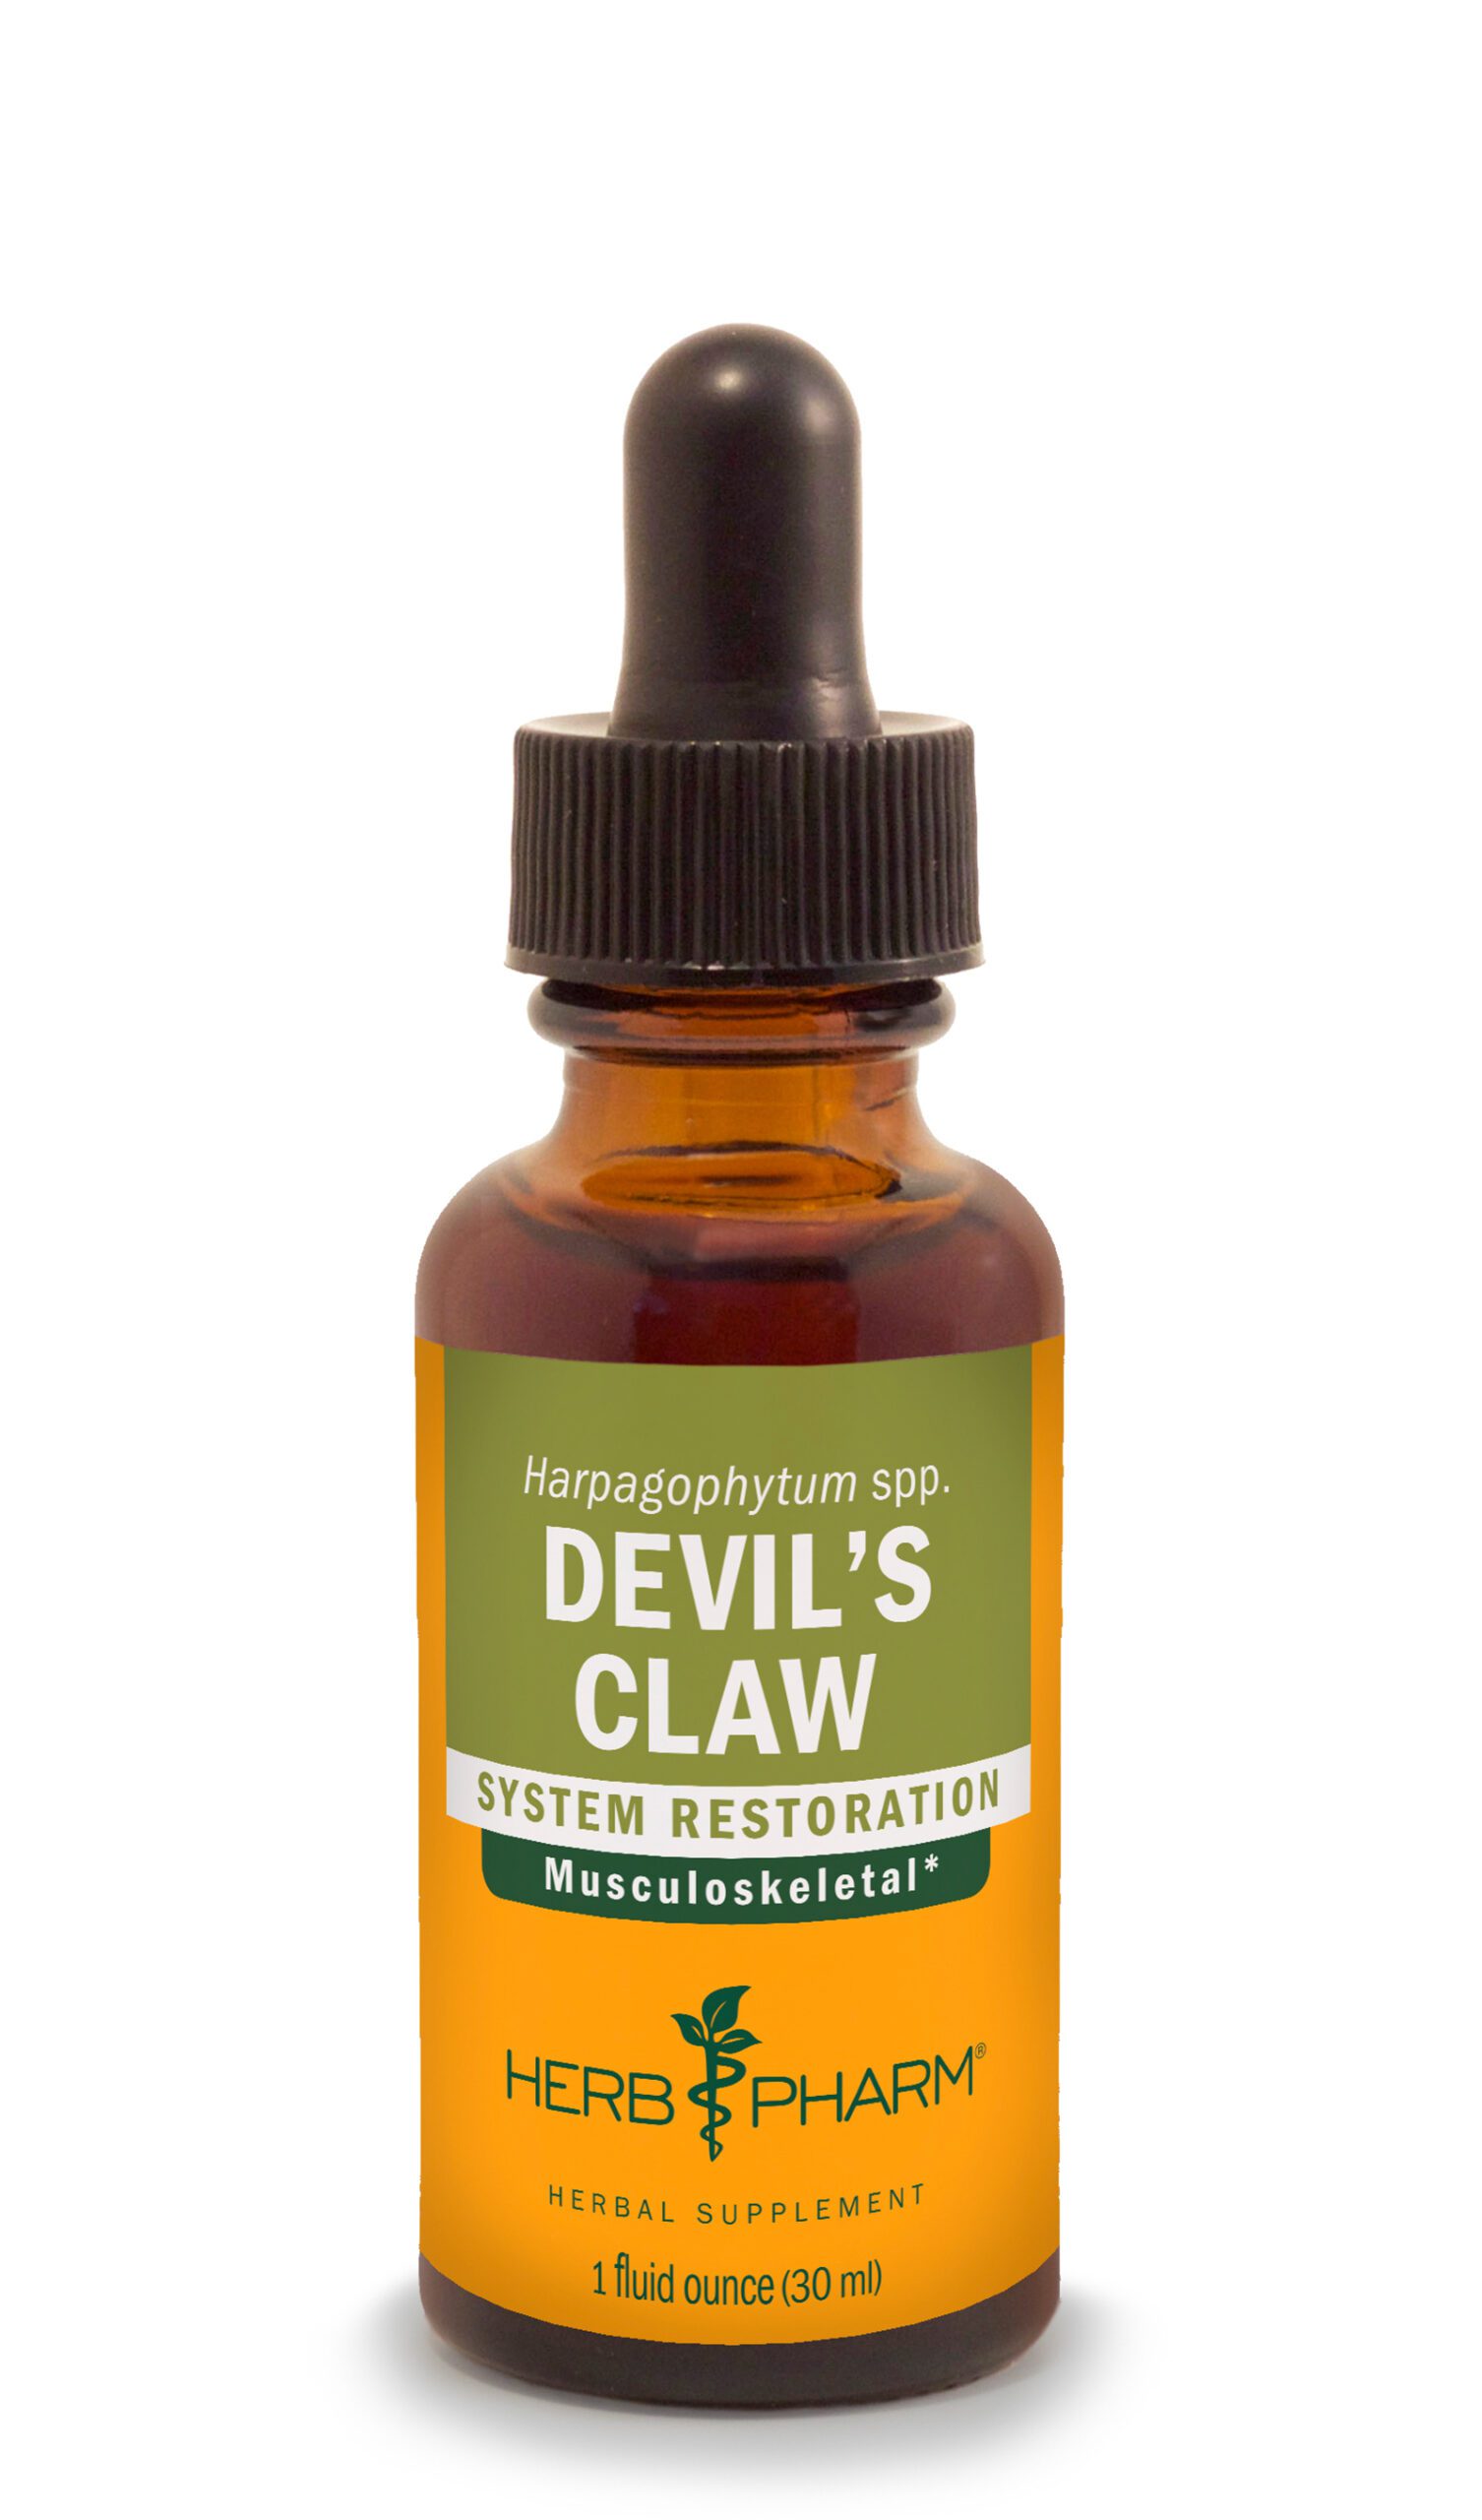 Product Listing Image for Herb Pharm Devil's Claw Tincture